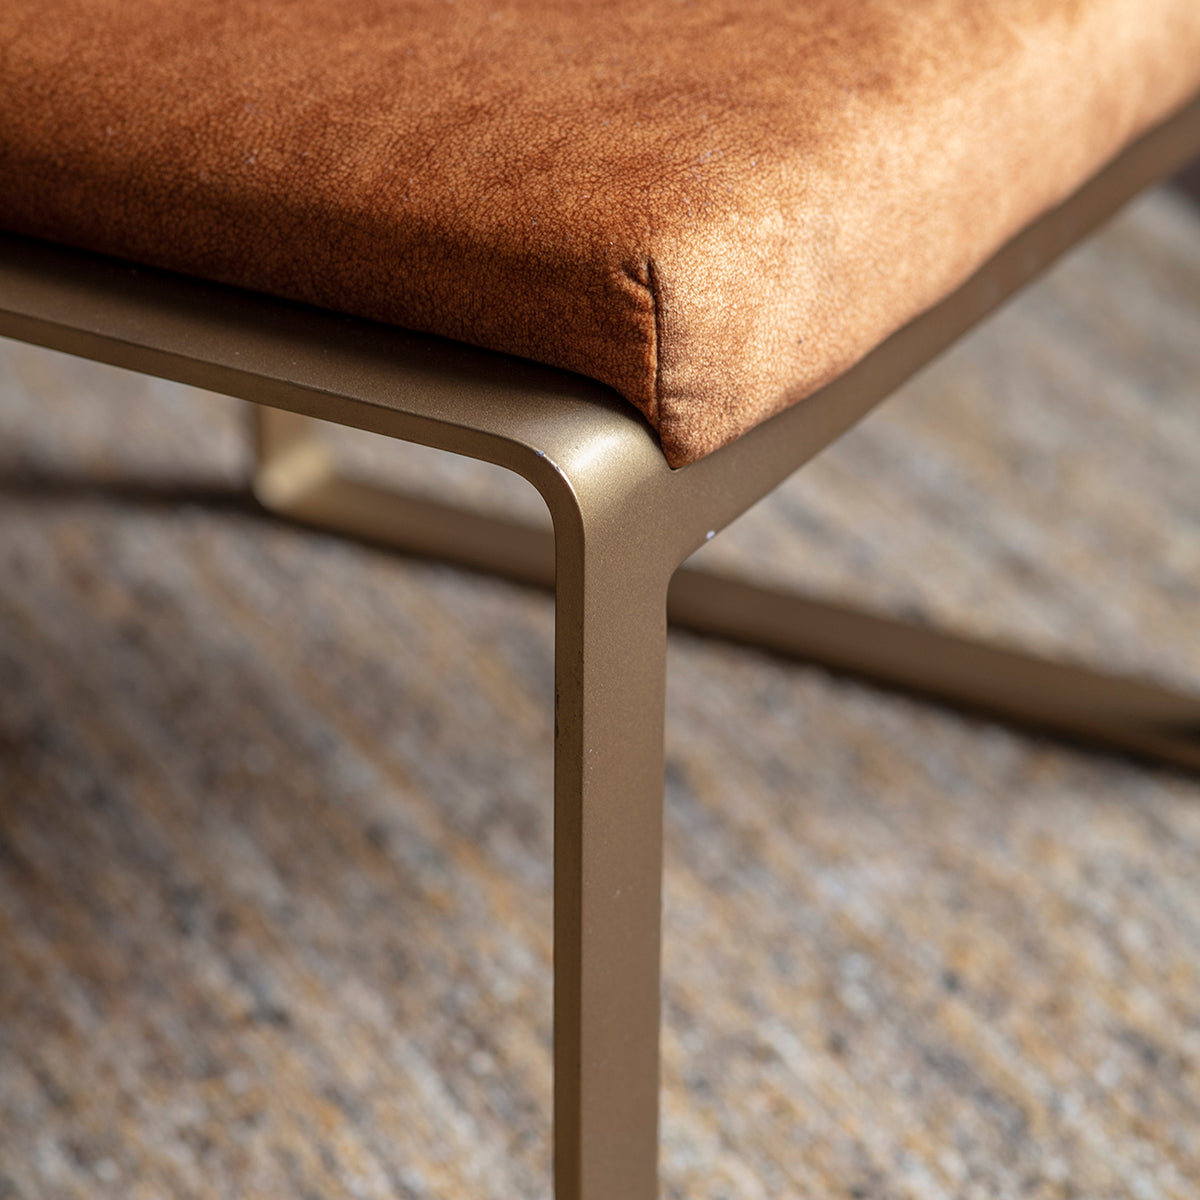 A Huish Footstool Ochre 500x430x360mm, perfect for interior decor, with a metal frame and a tan upholstered seat by Kikiathome.co.uk.